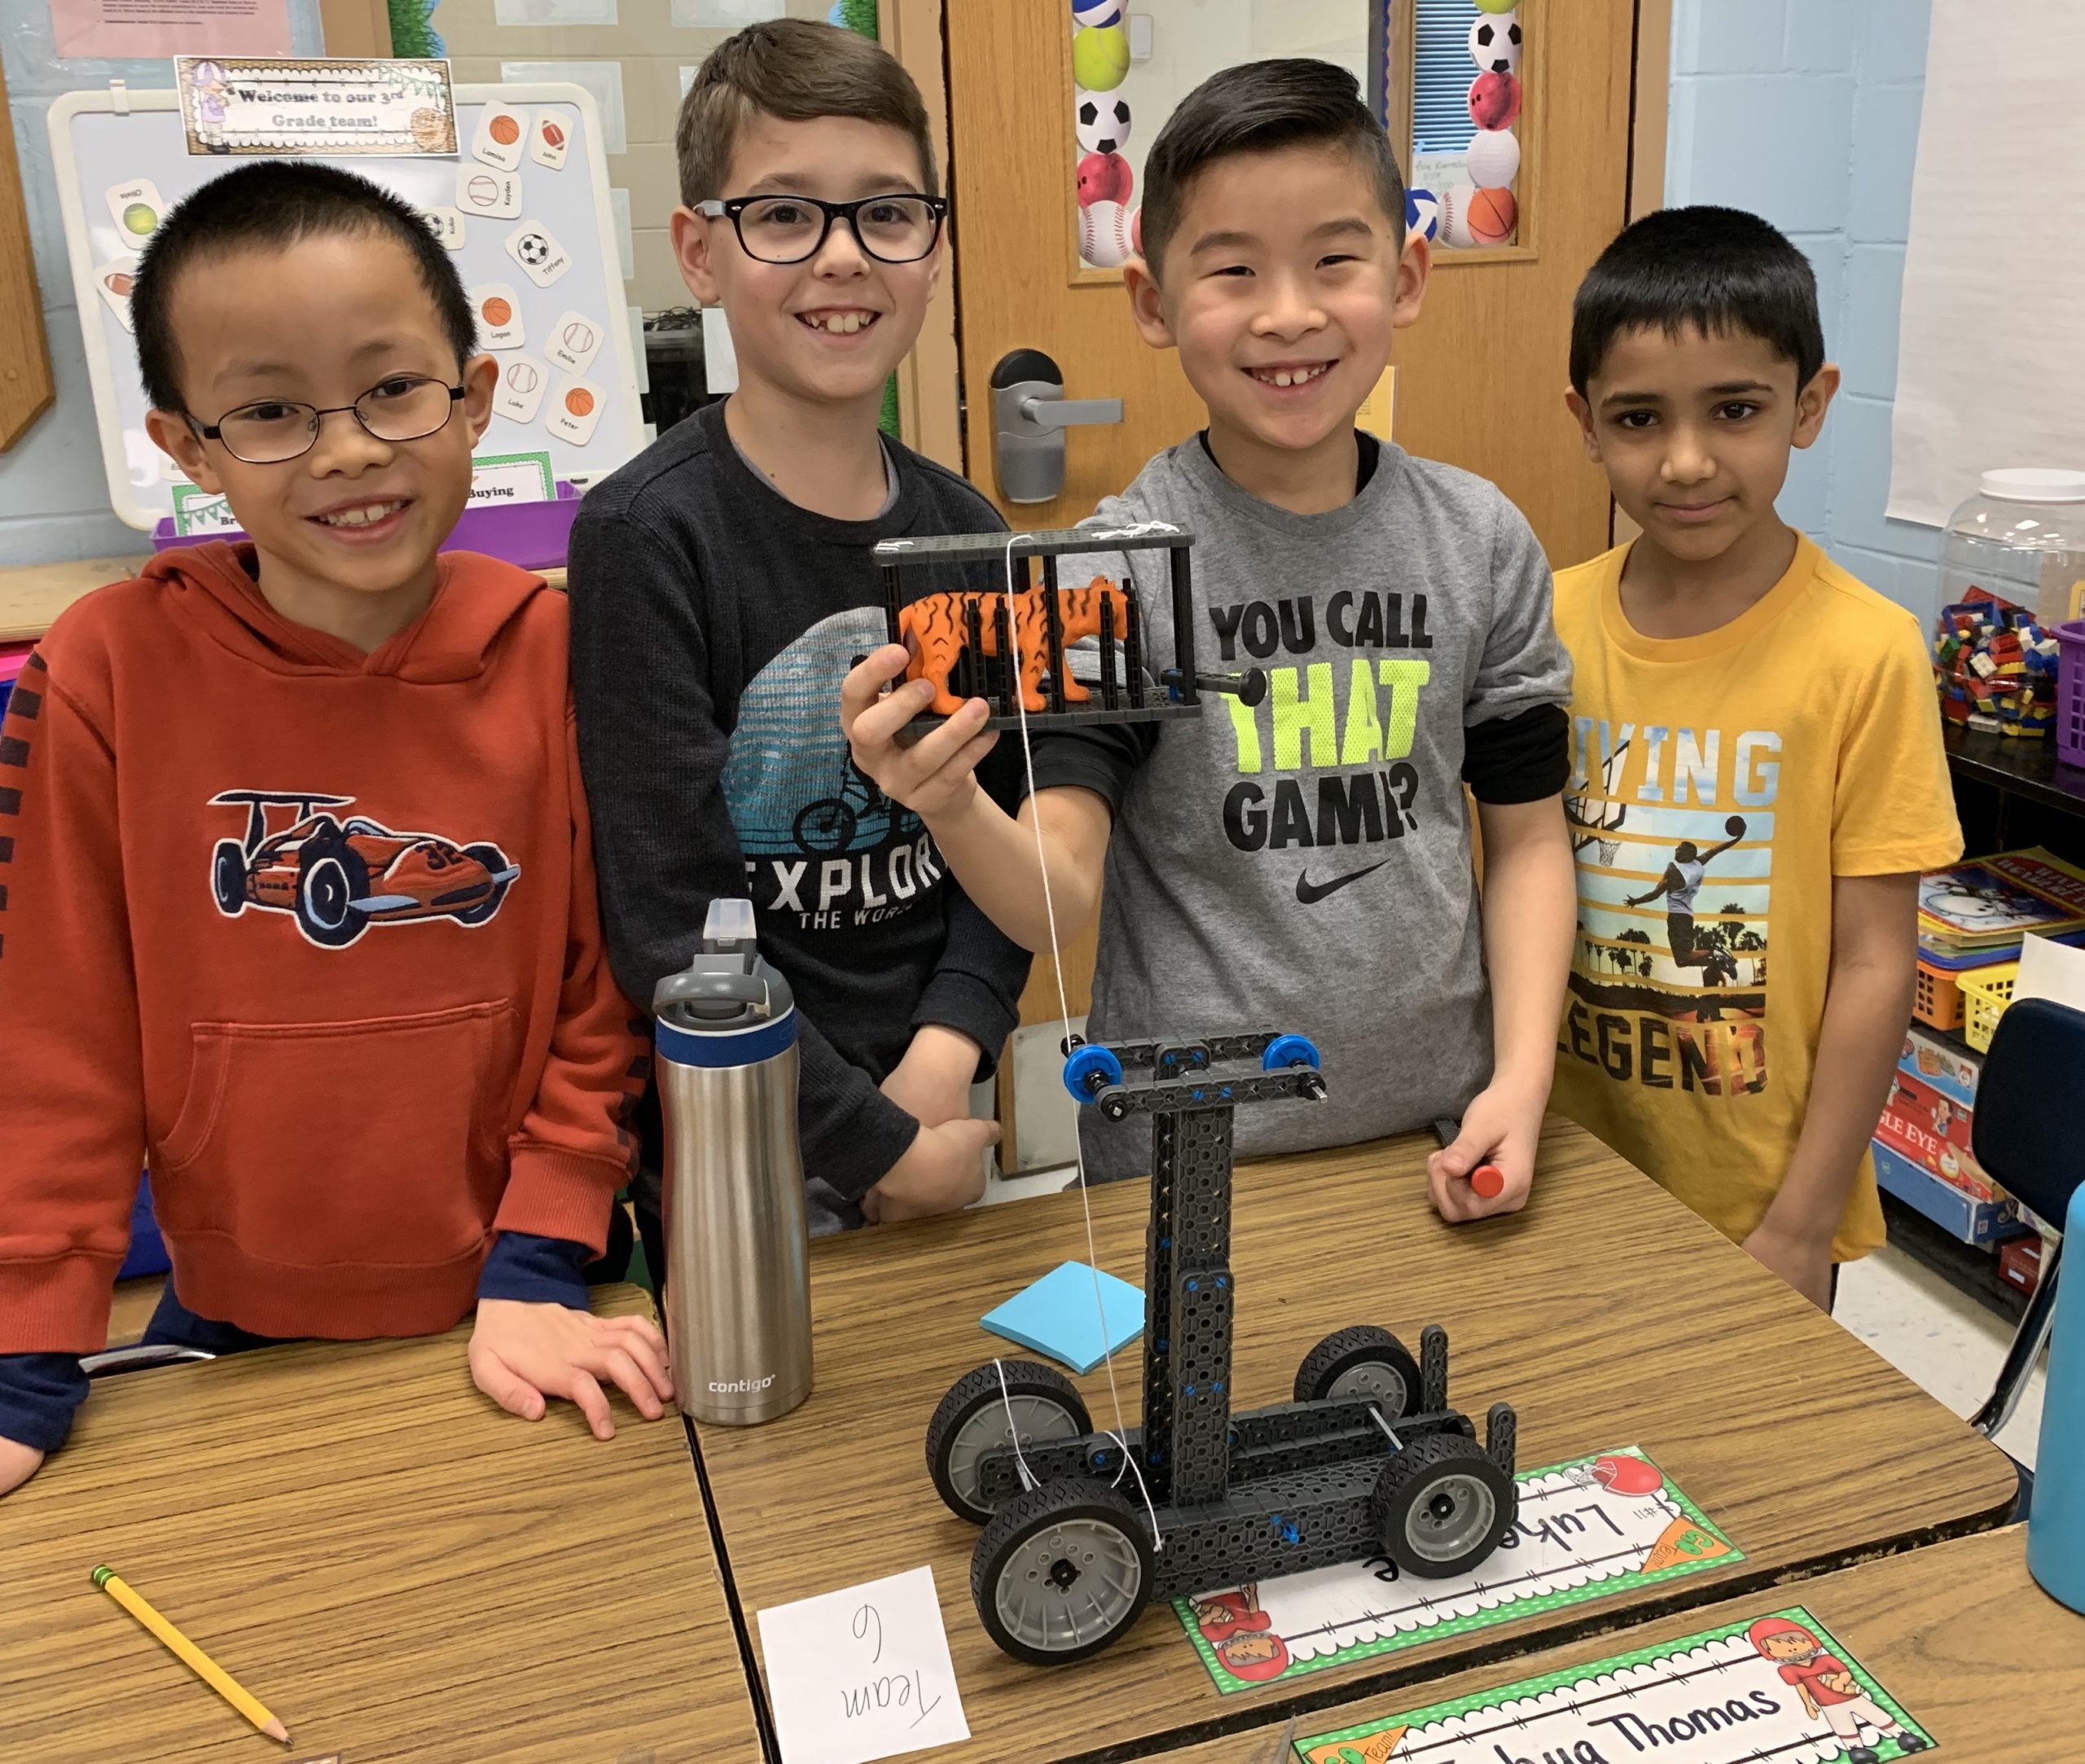 Students at Center Street Elementary School participated in Project Lead the Way activities during a recent lesson. (Photo courtesy of Herricks Public Schools)